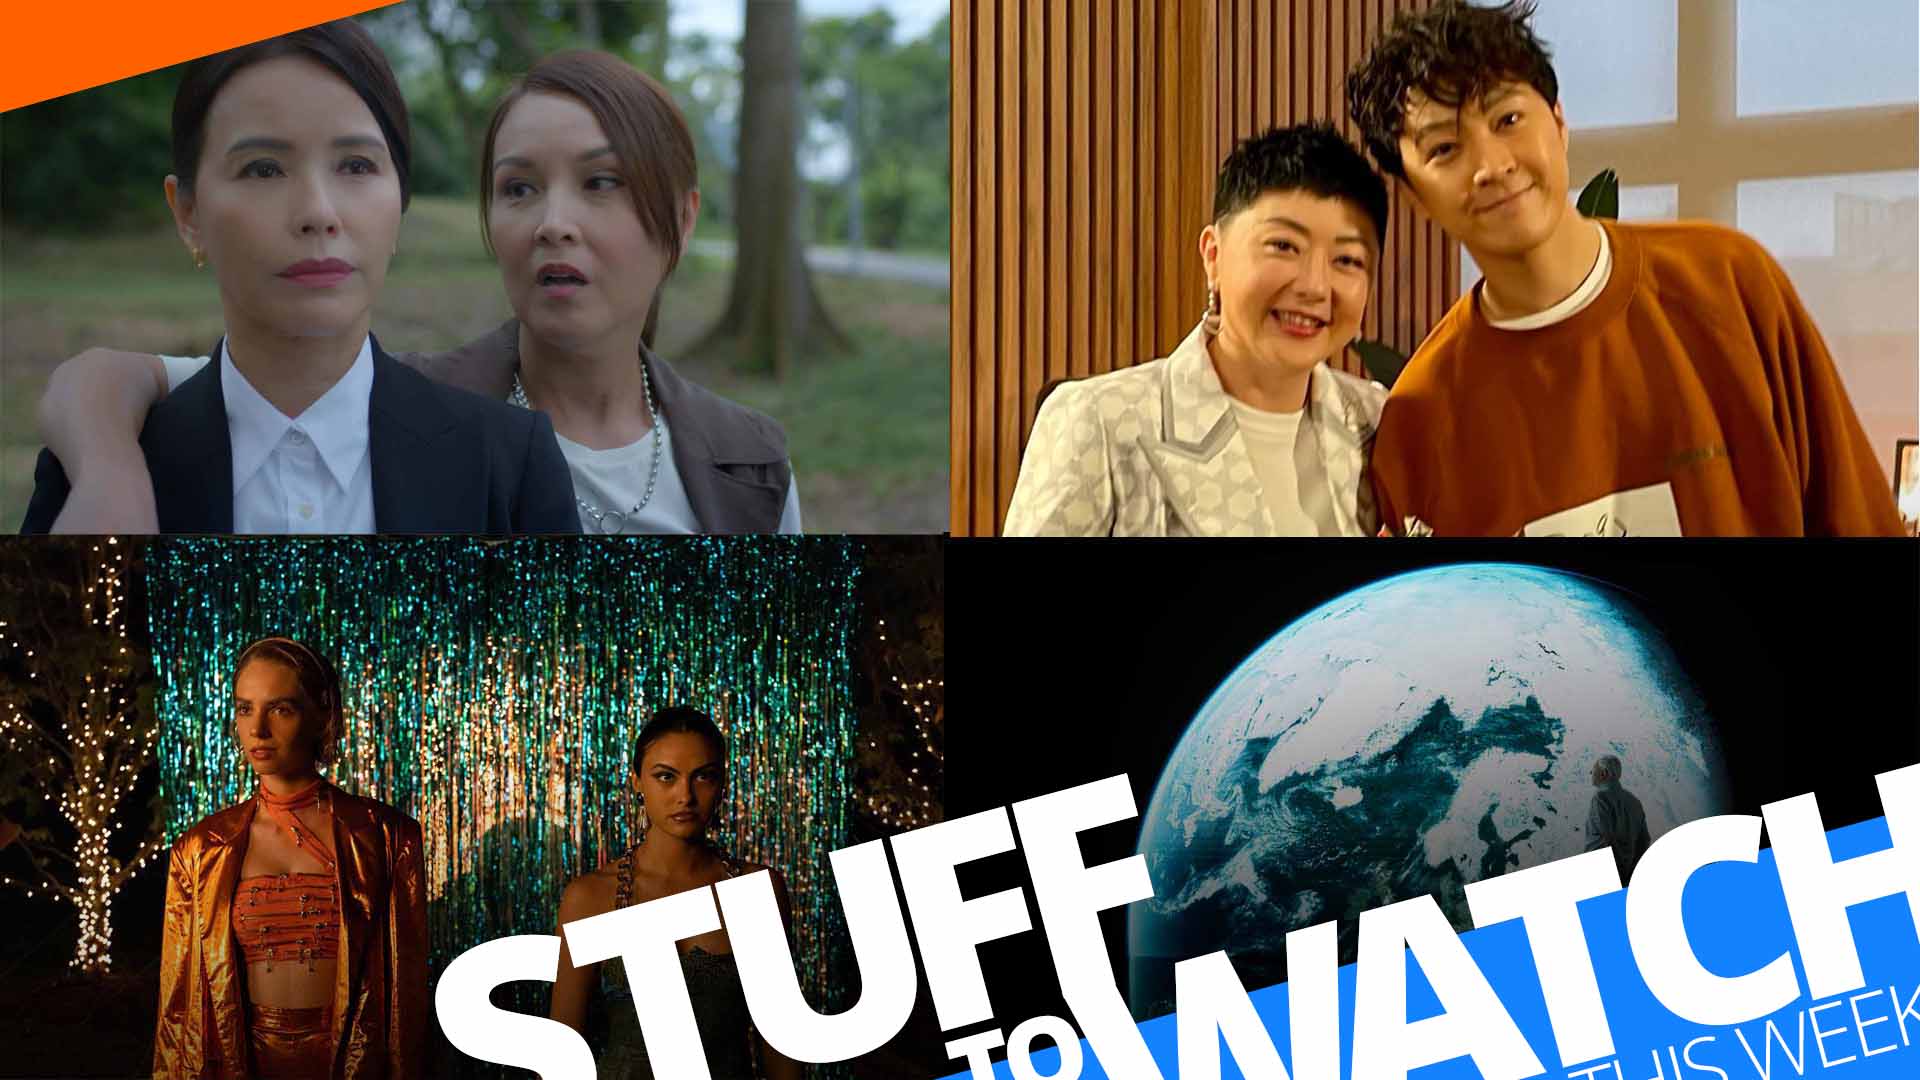 Stuff To Watch This Week (Sept 12-18, 2022)